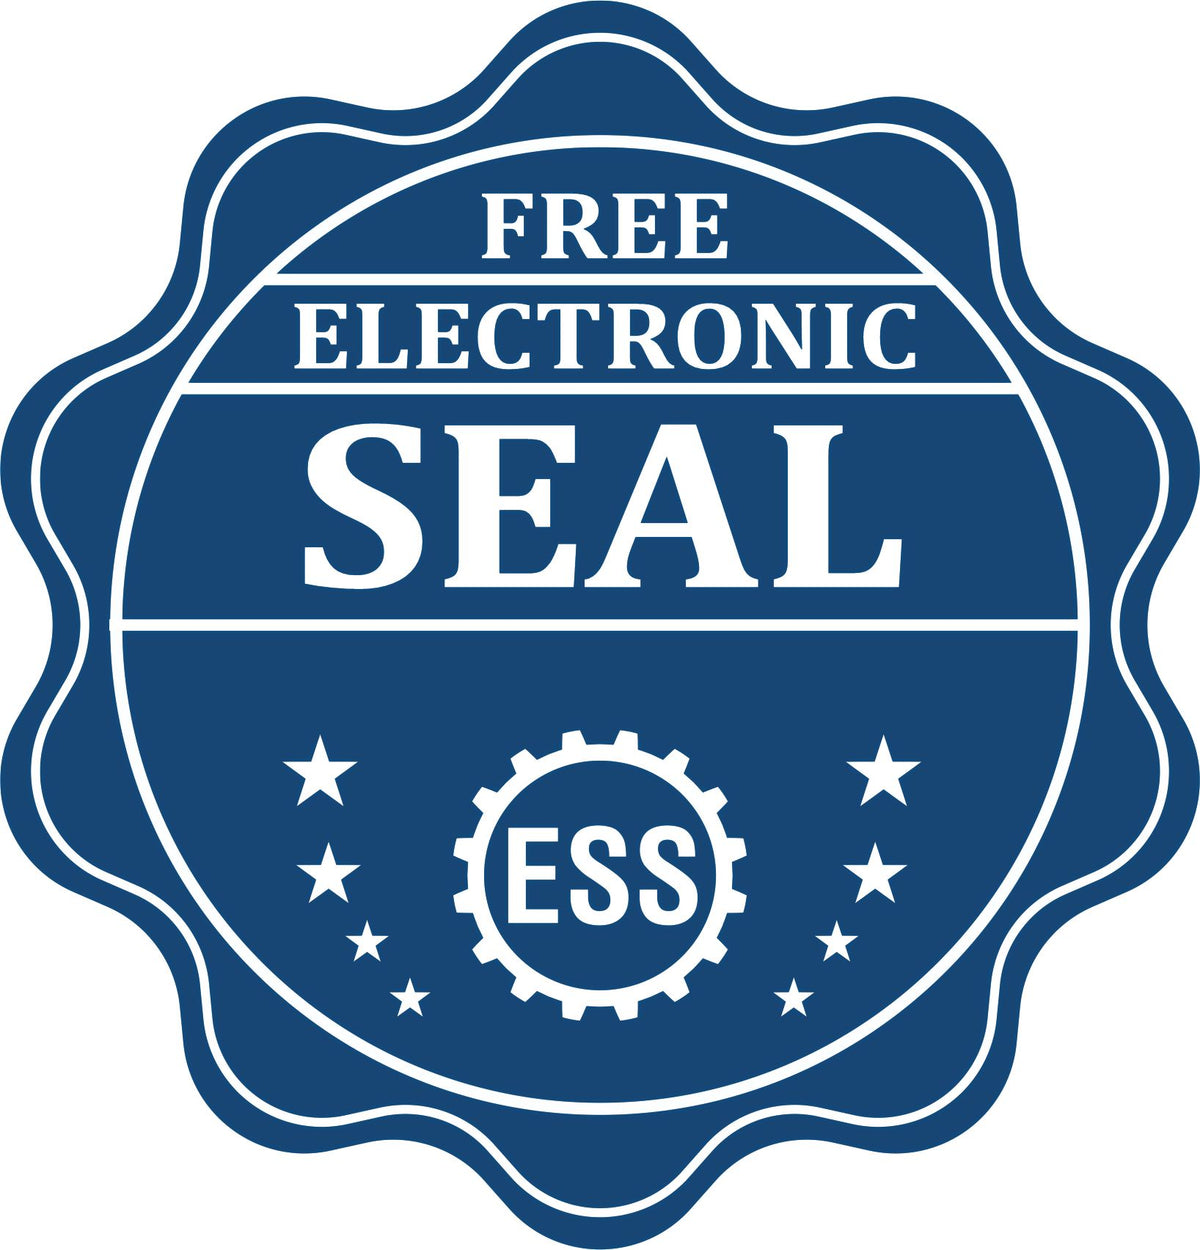 A badge showing a free electronic seal for the Handheld Alabama Professional Engineer Embosser with stars and the ESS gear on the emblem.